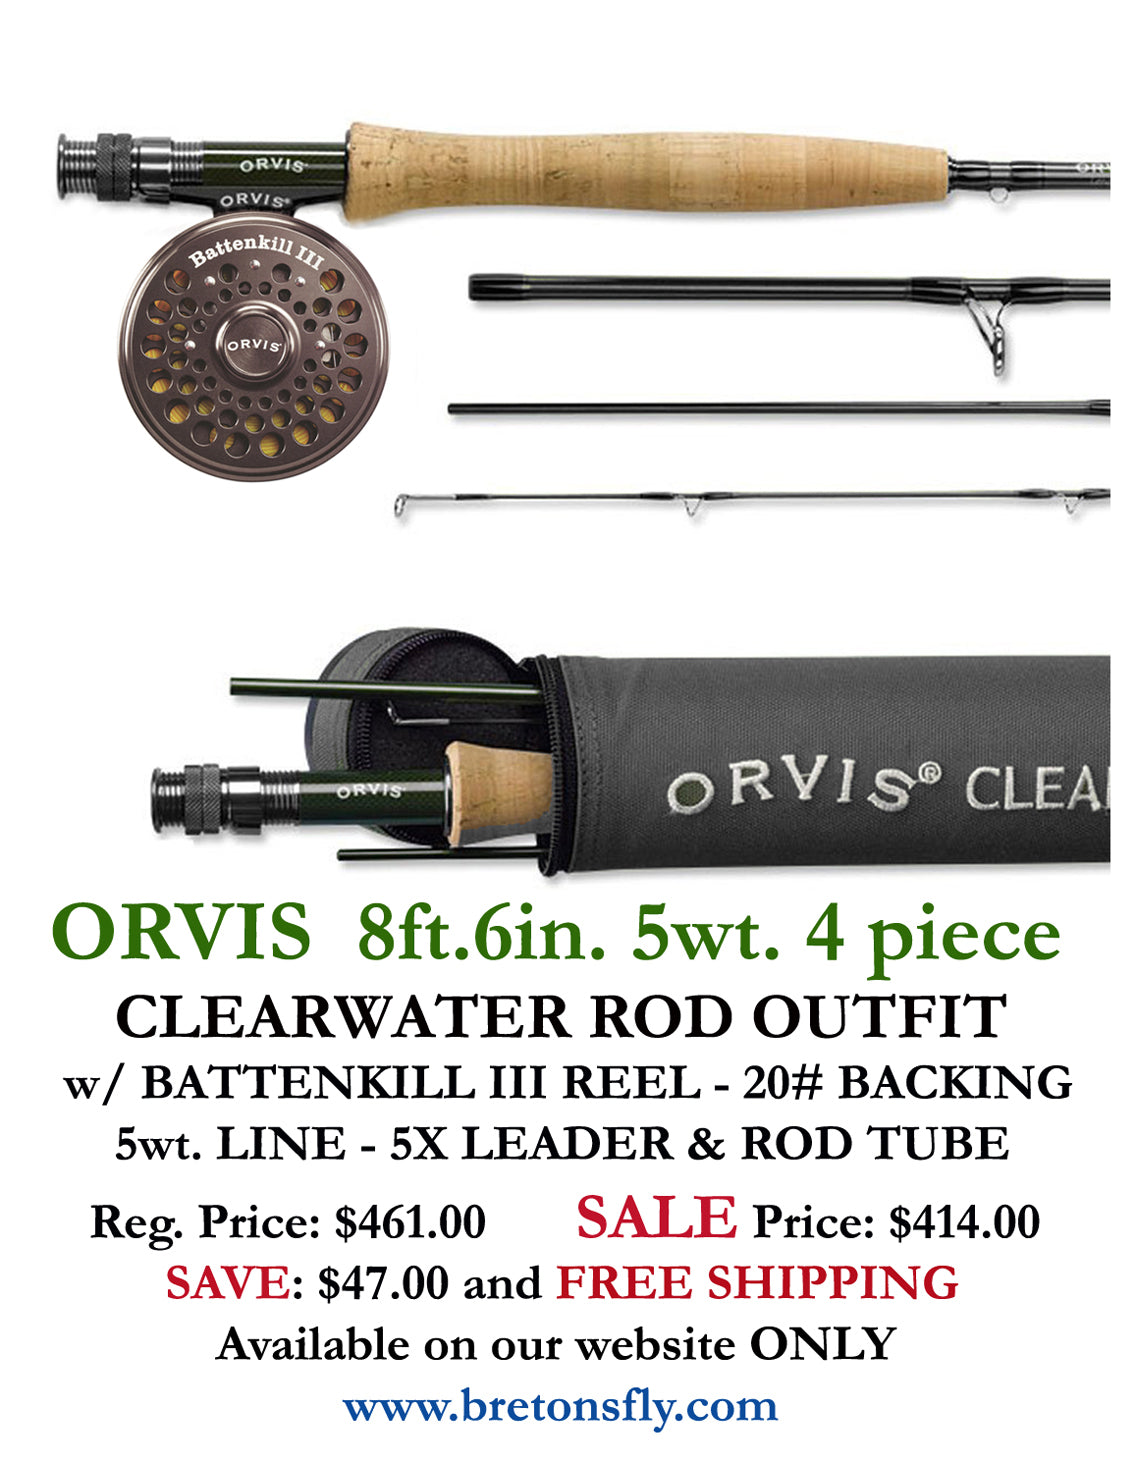 Orvis Clearwater Fly Rod 10' 5wt 4pc